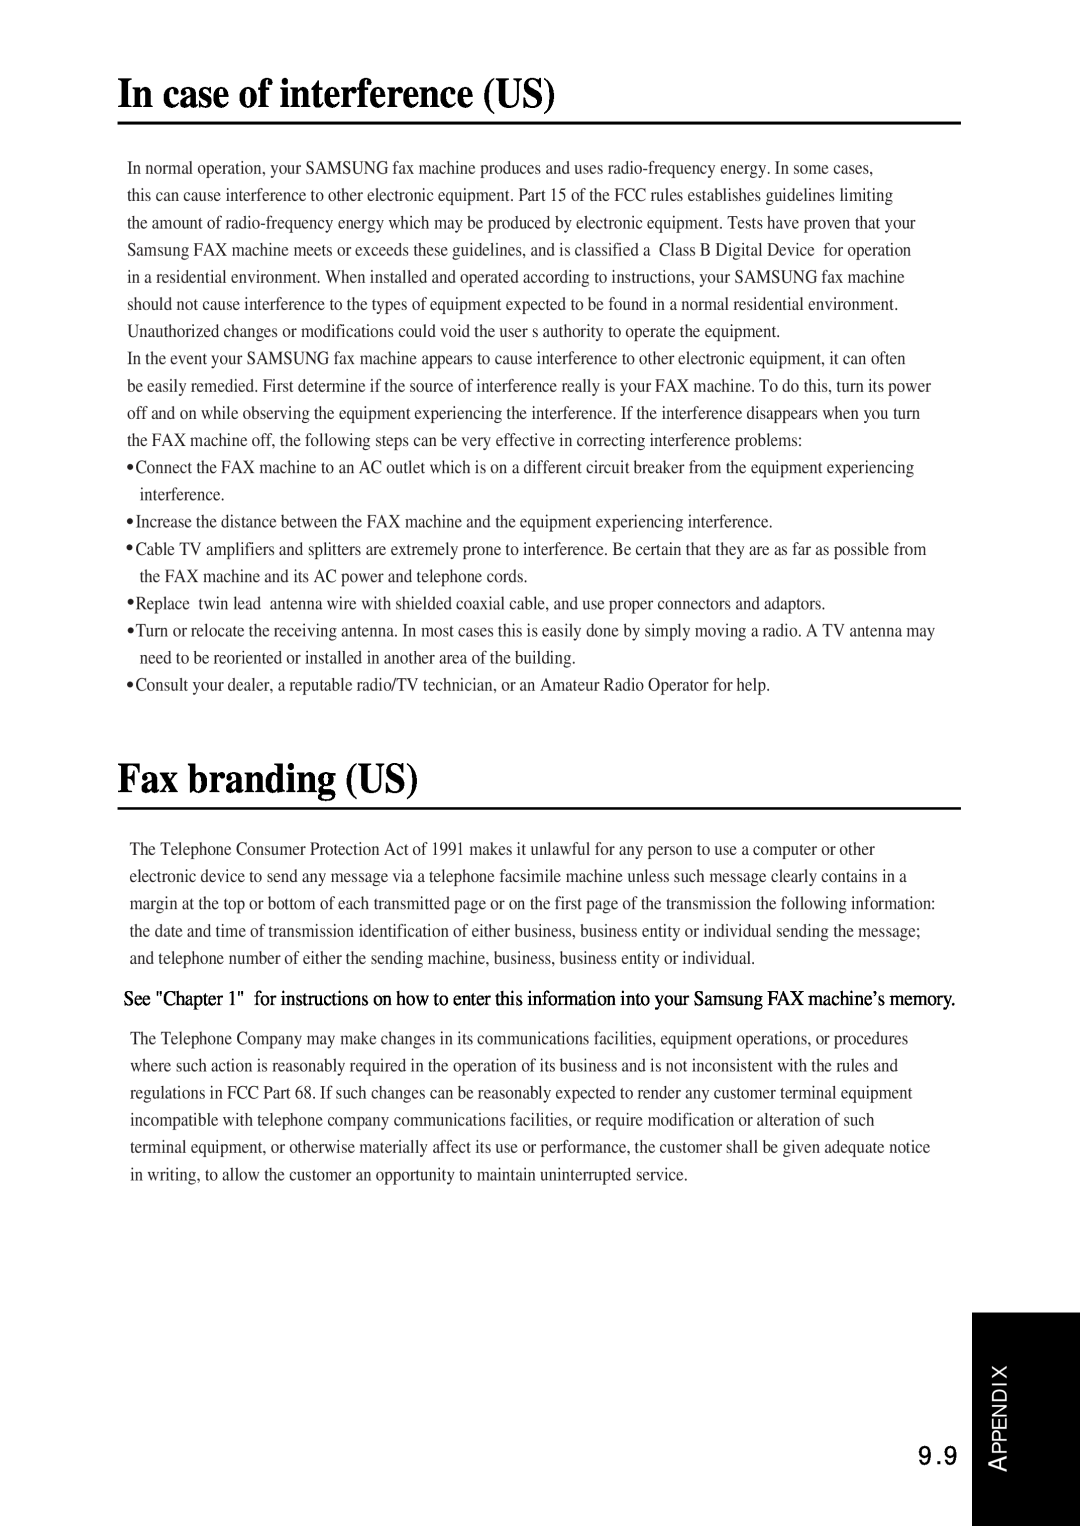 Samsung SF-340 Series manual In case of interference US, Fax branding US 